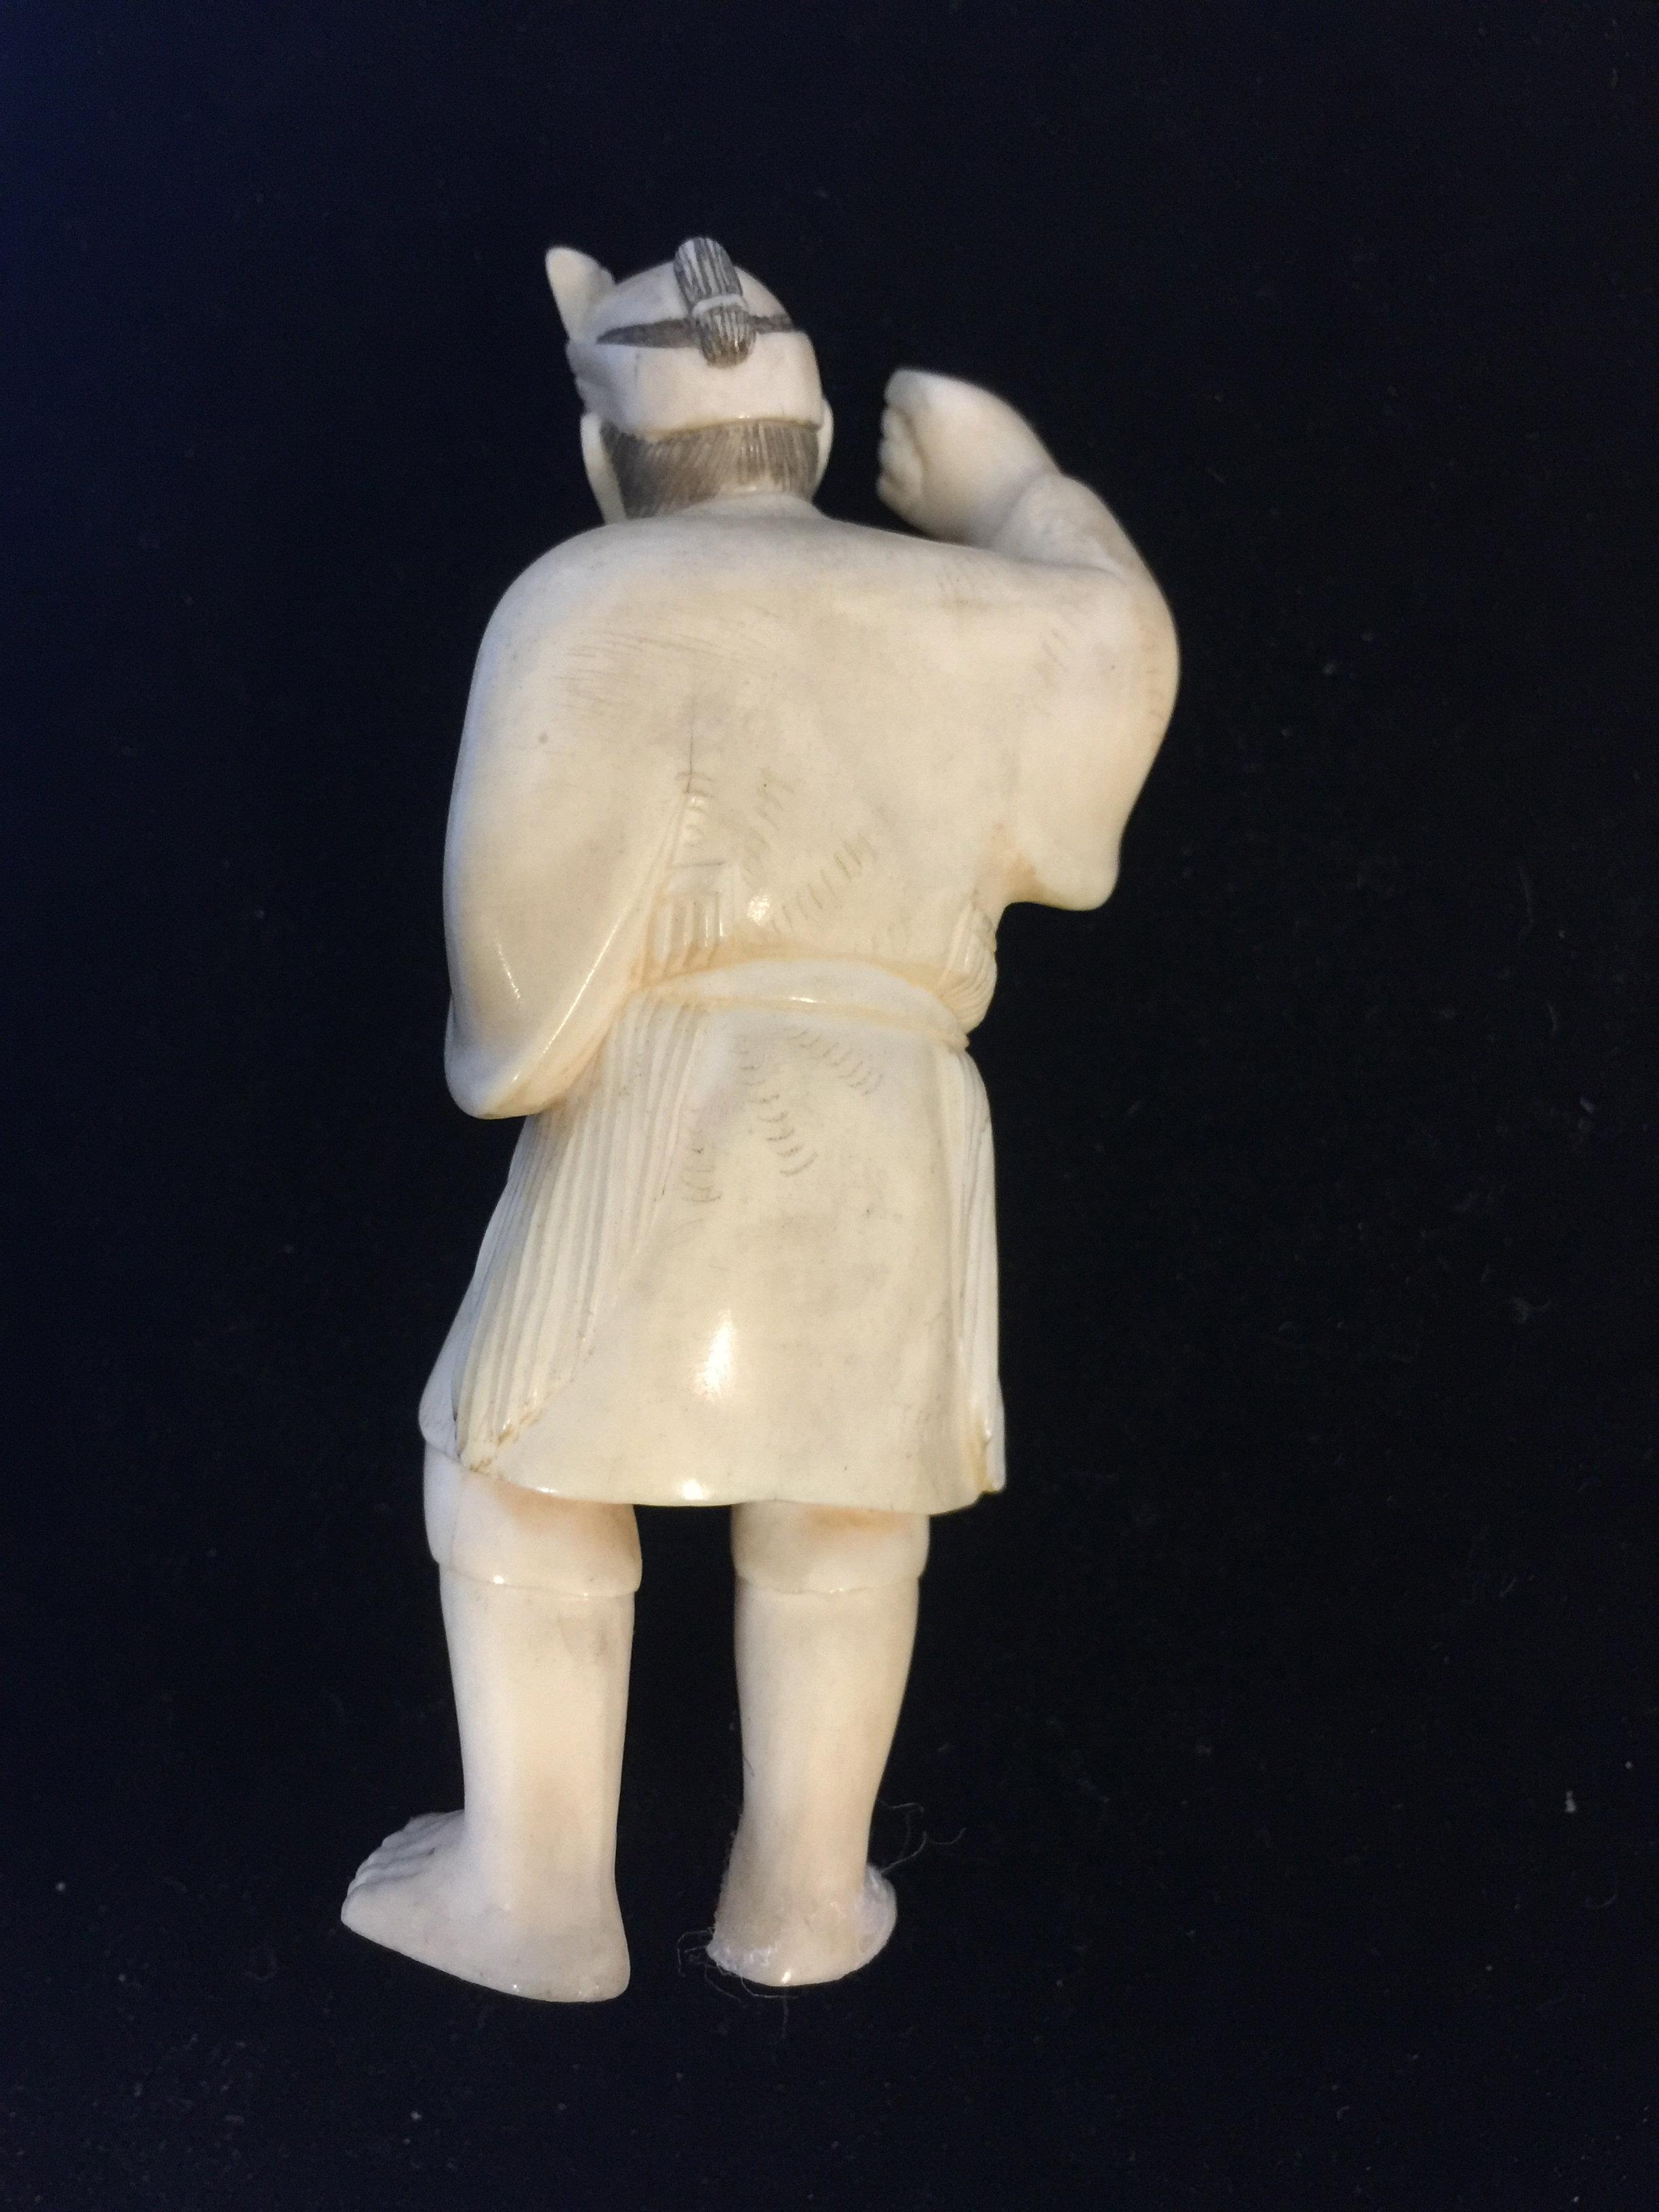 Antique Carved Ivory Chinese Man Statue 3" Tall - Stands on Own - Highly Detailed Unknown Origin